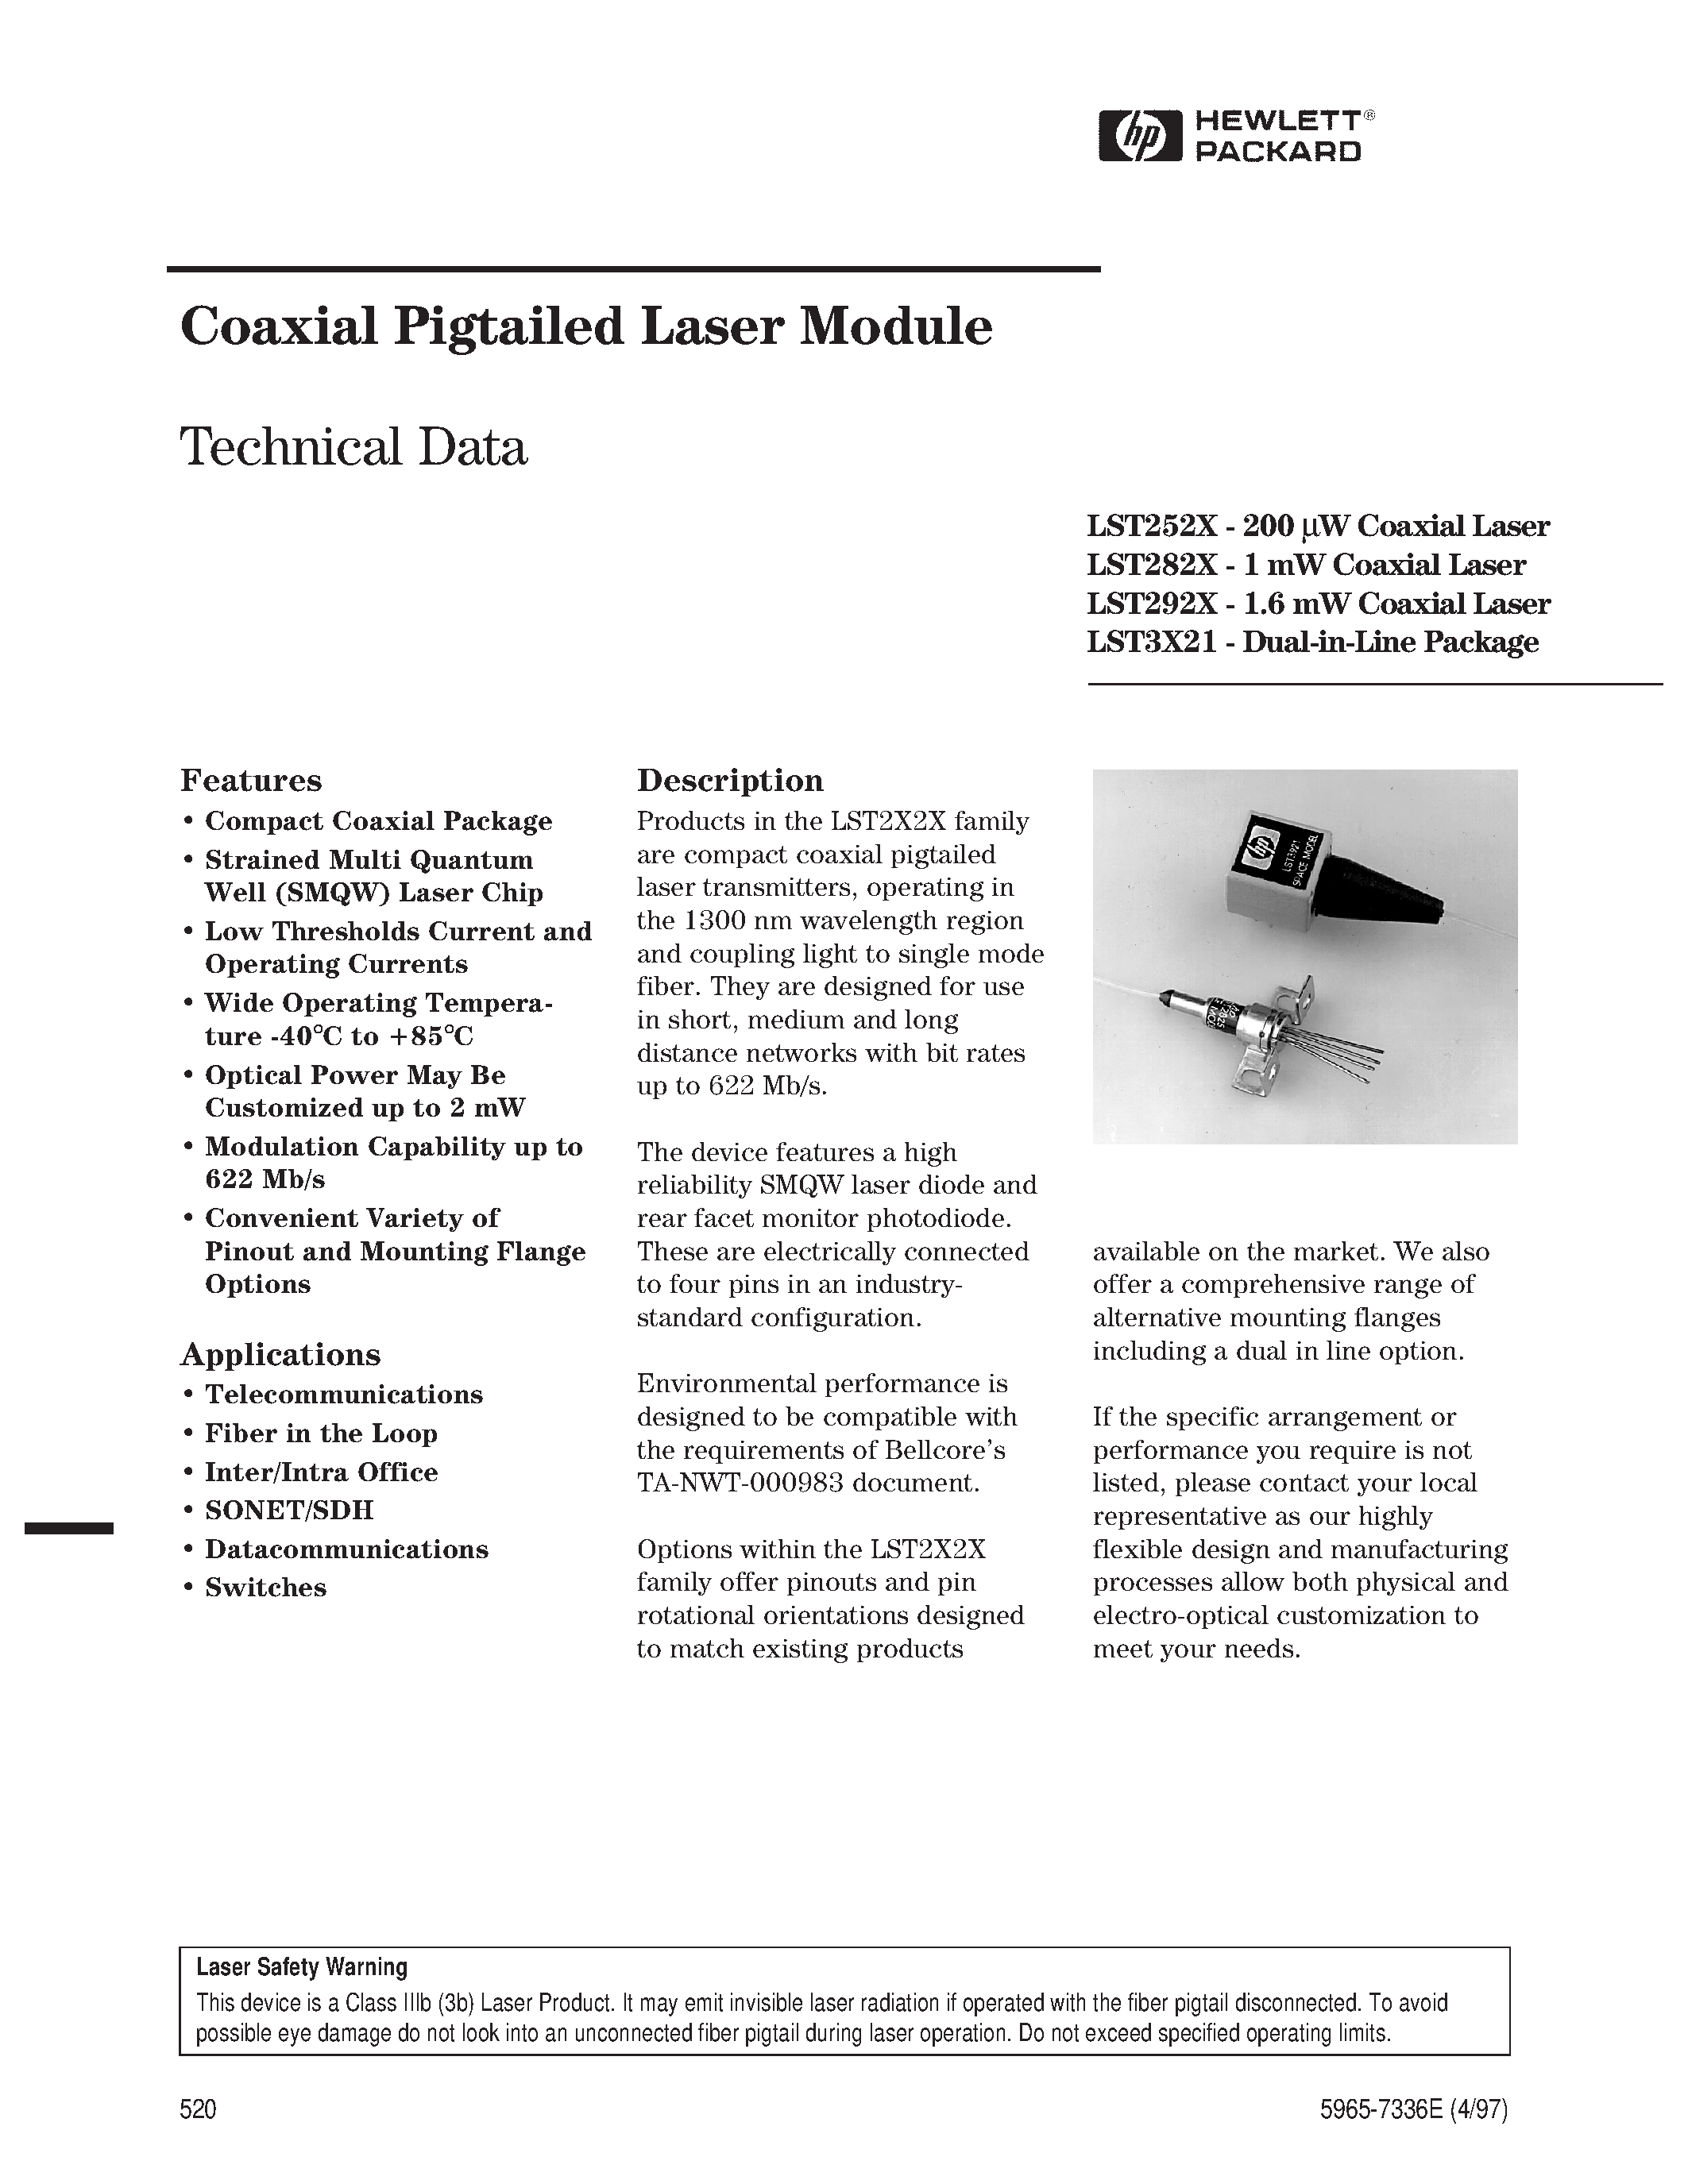 Datasheet LST2925-S4-T-DN - Coaxial Pigtailed Laser Module page 1